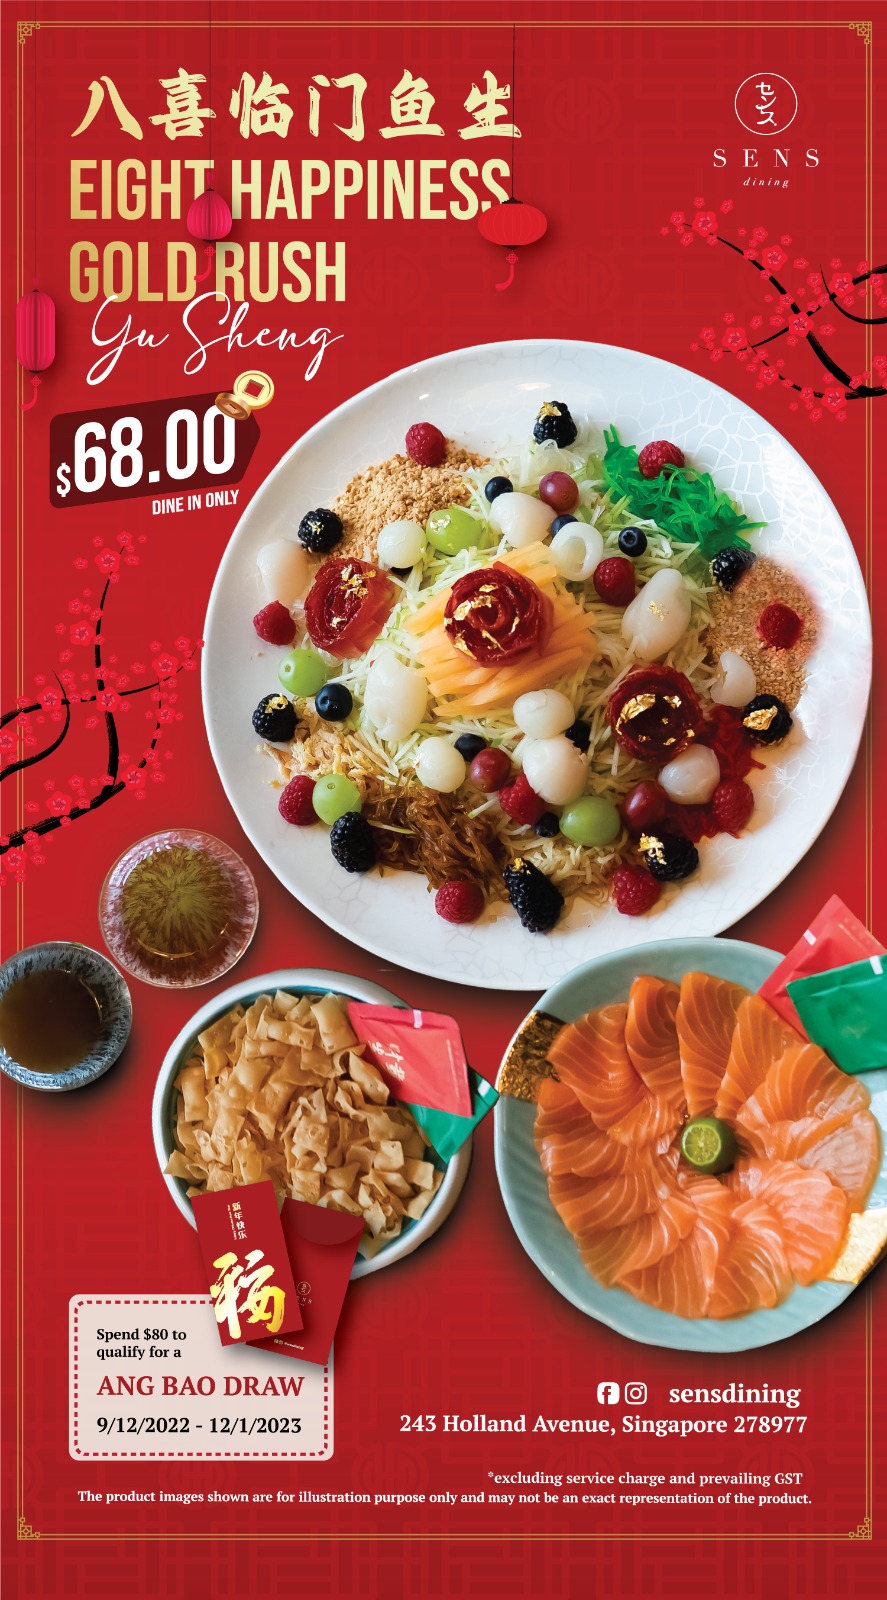 Lobang: MORE THAN 50 CNY 2023 F&B Deals - Your one stop guide to Yusheng, Pen Cai, Set Menus and more this Lunar New Year! - 45